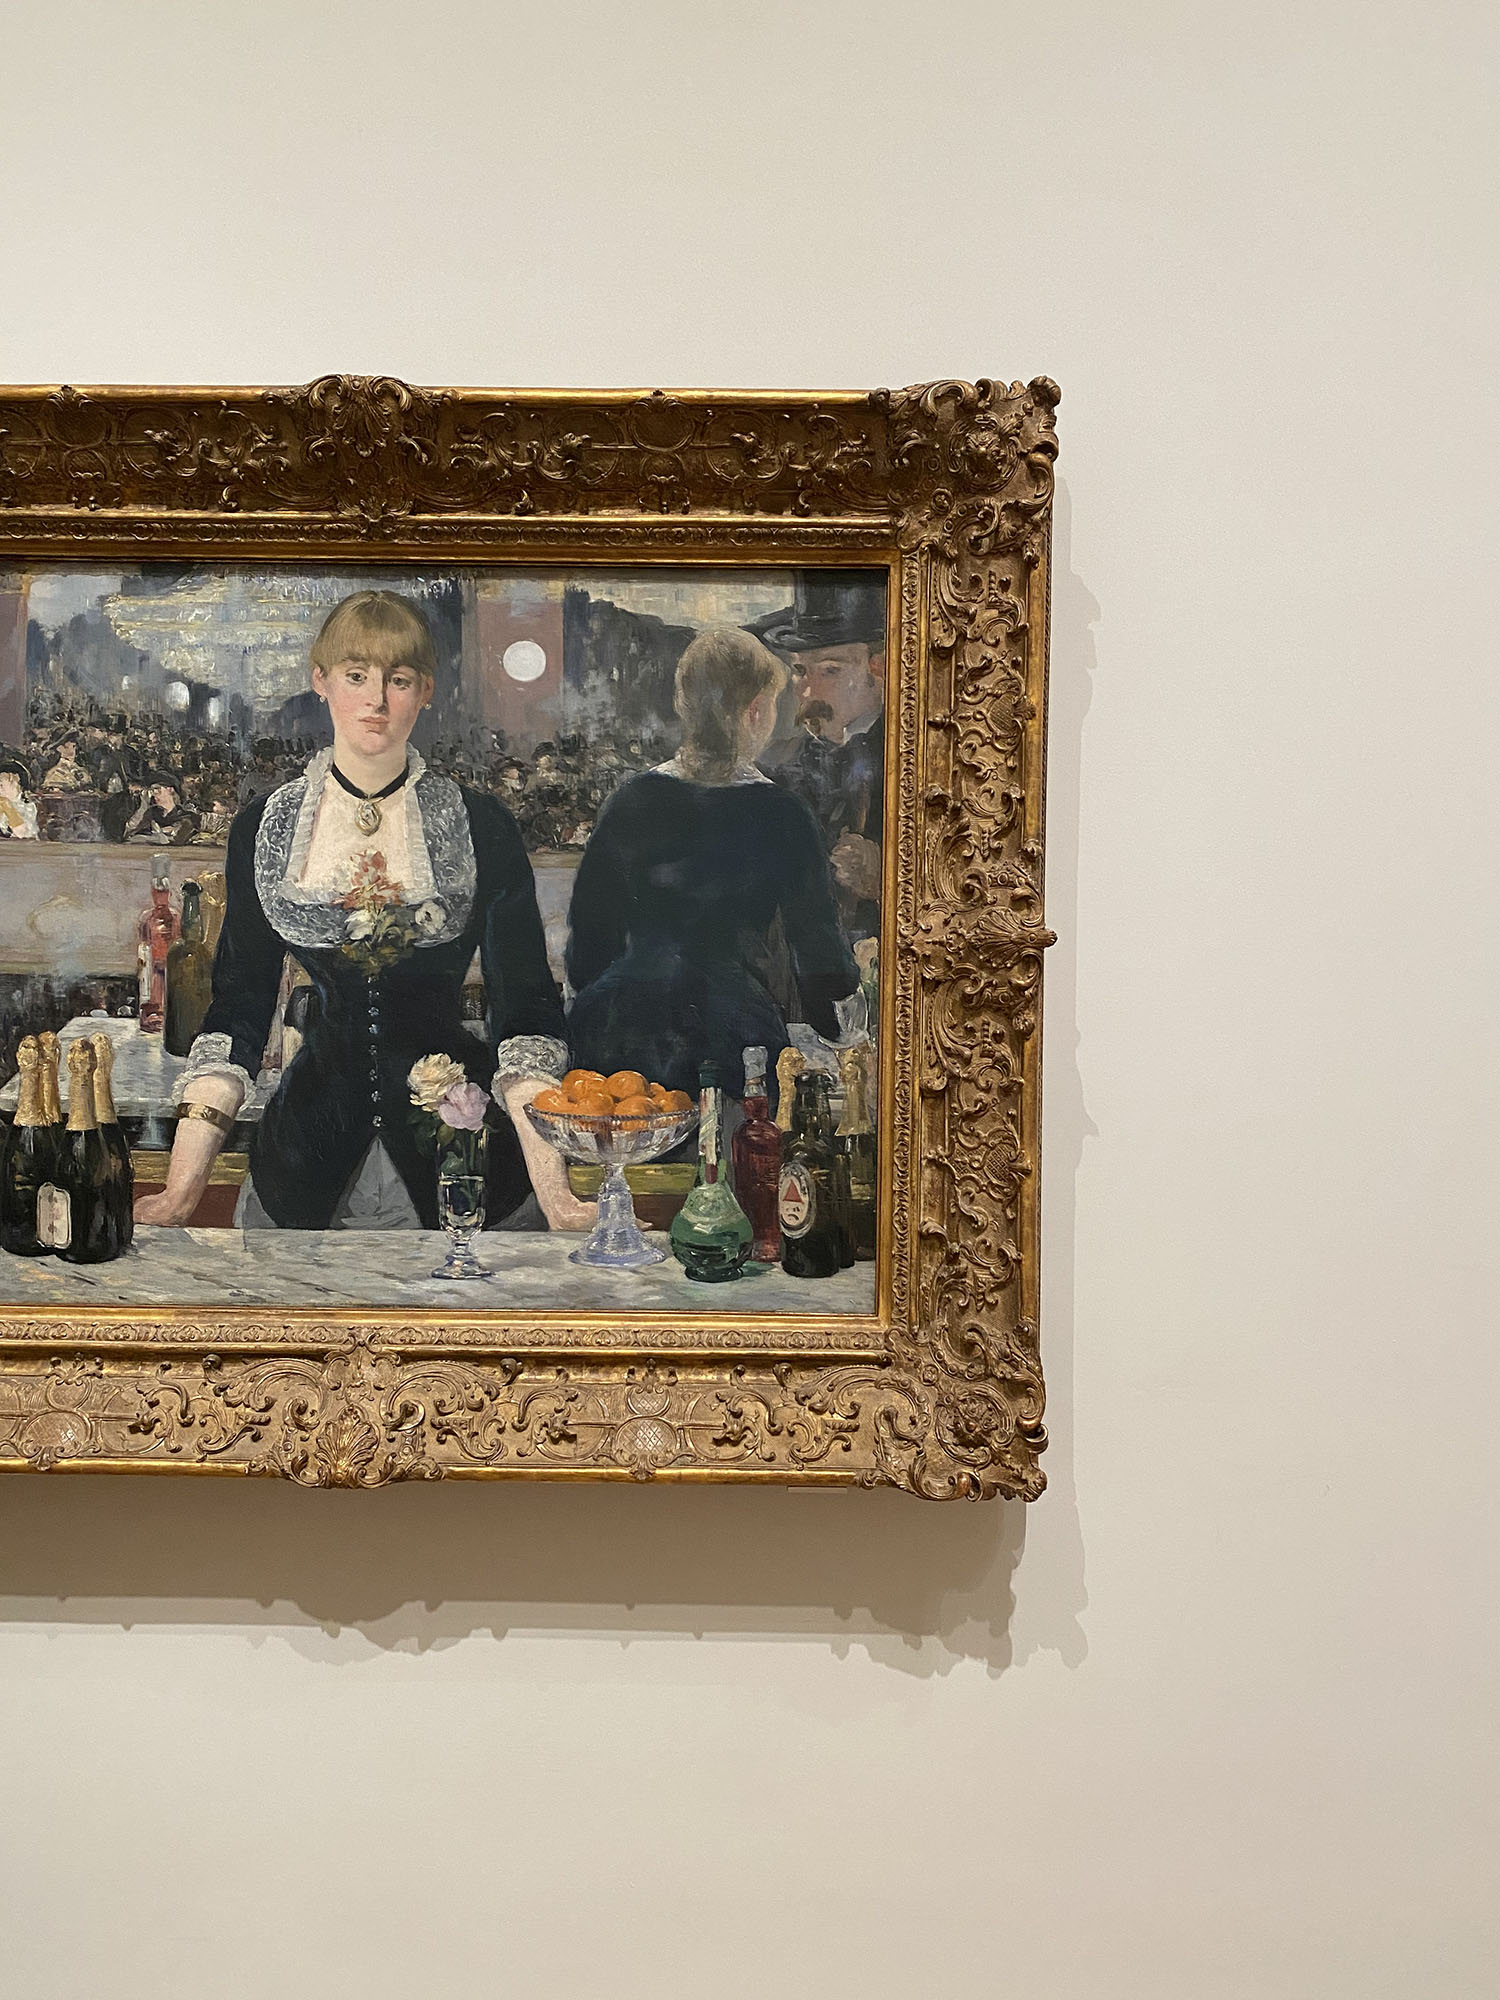 Coco & Vera - Painting by Edgar Manet at Cortauld Gallery in London, England